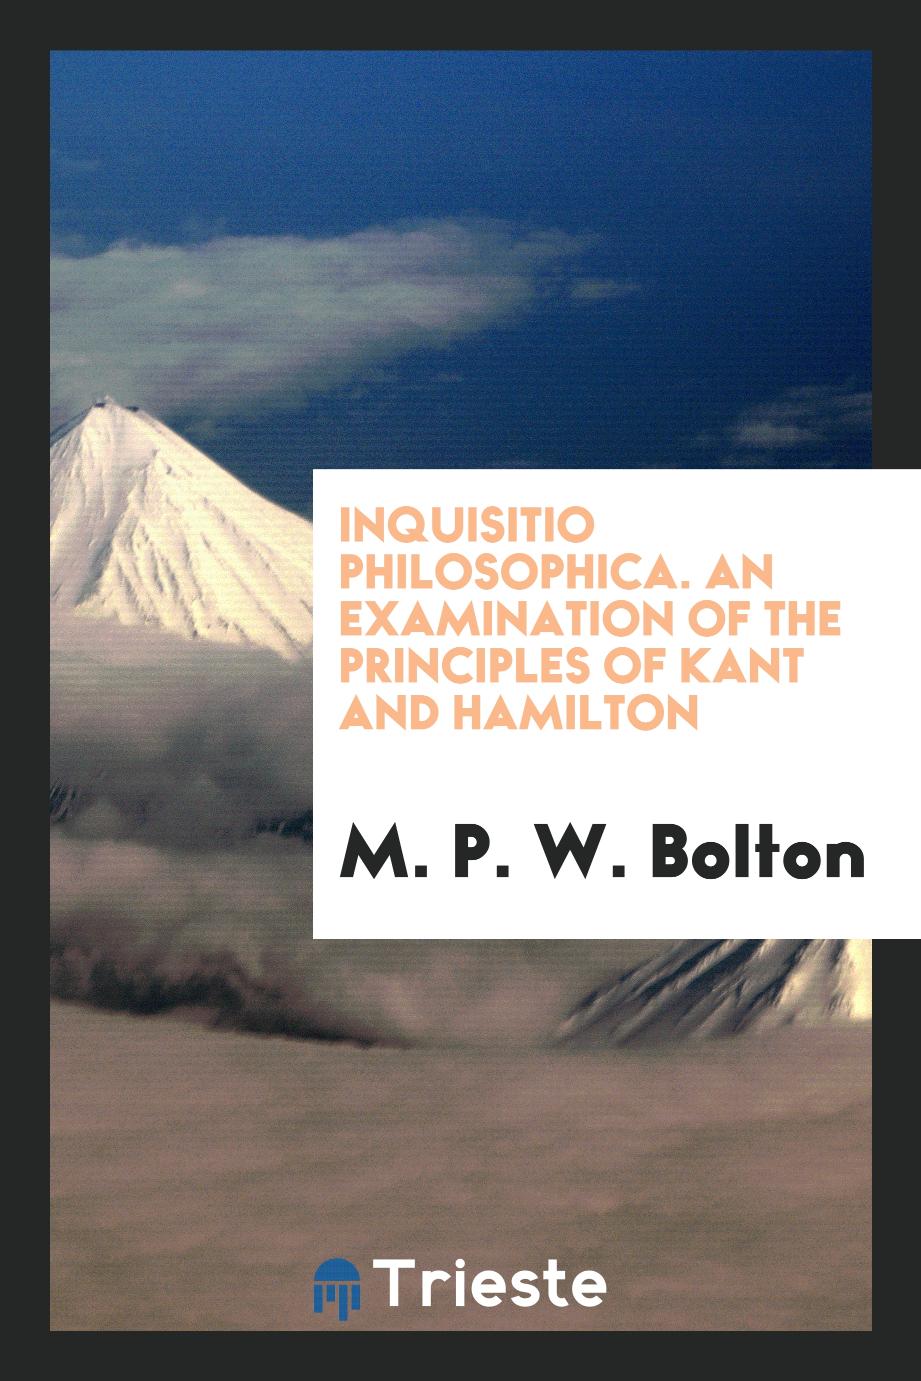 M. P. W. Bolton - Inquisitio philosophica. An examination of the principles of Kant and Hamilton